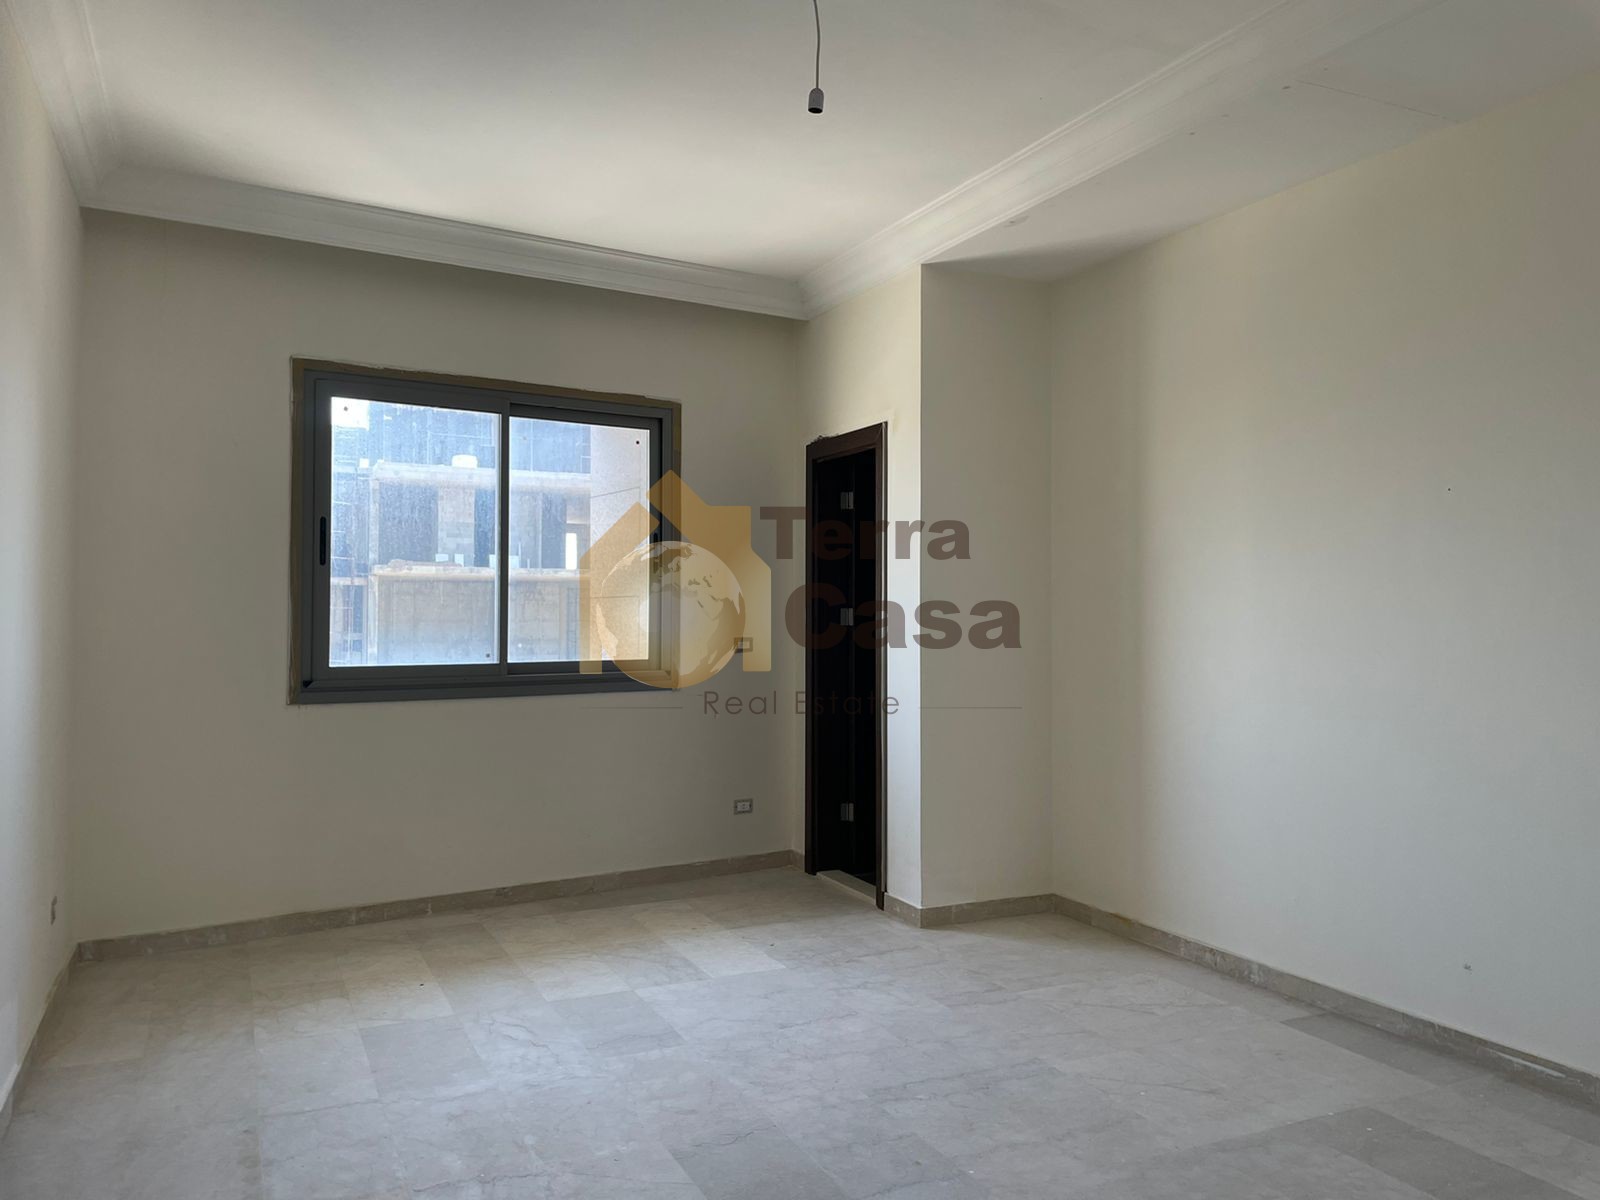 Jnah brand new luxurious apartment for sale .